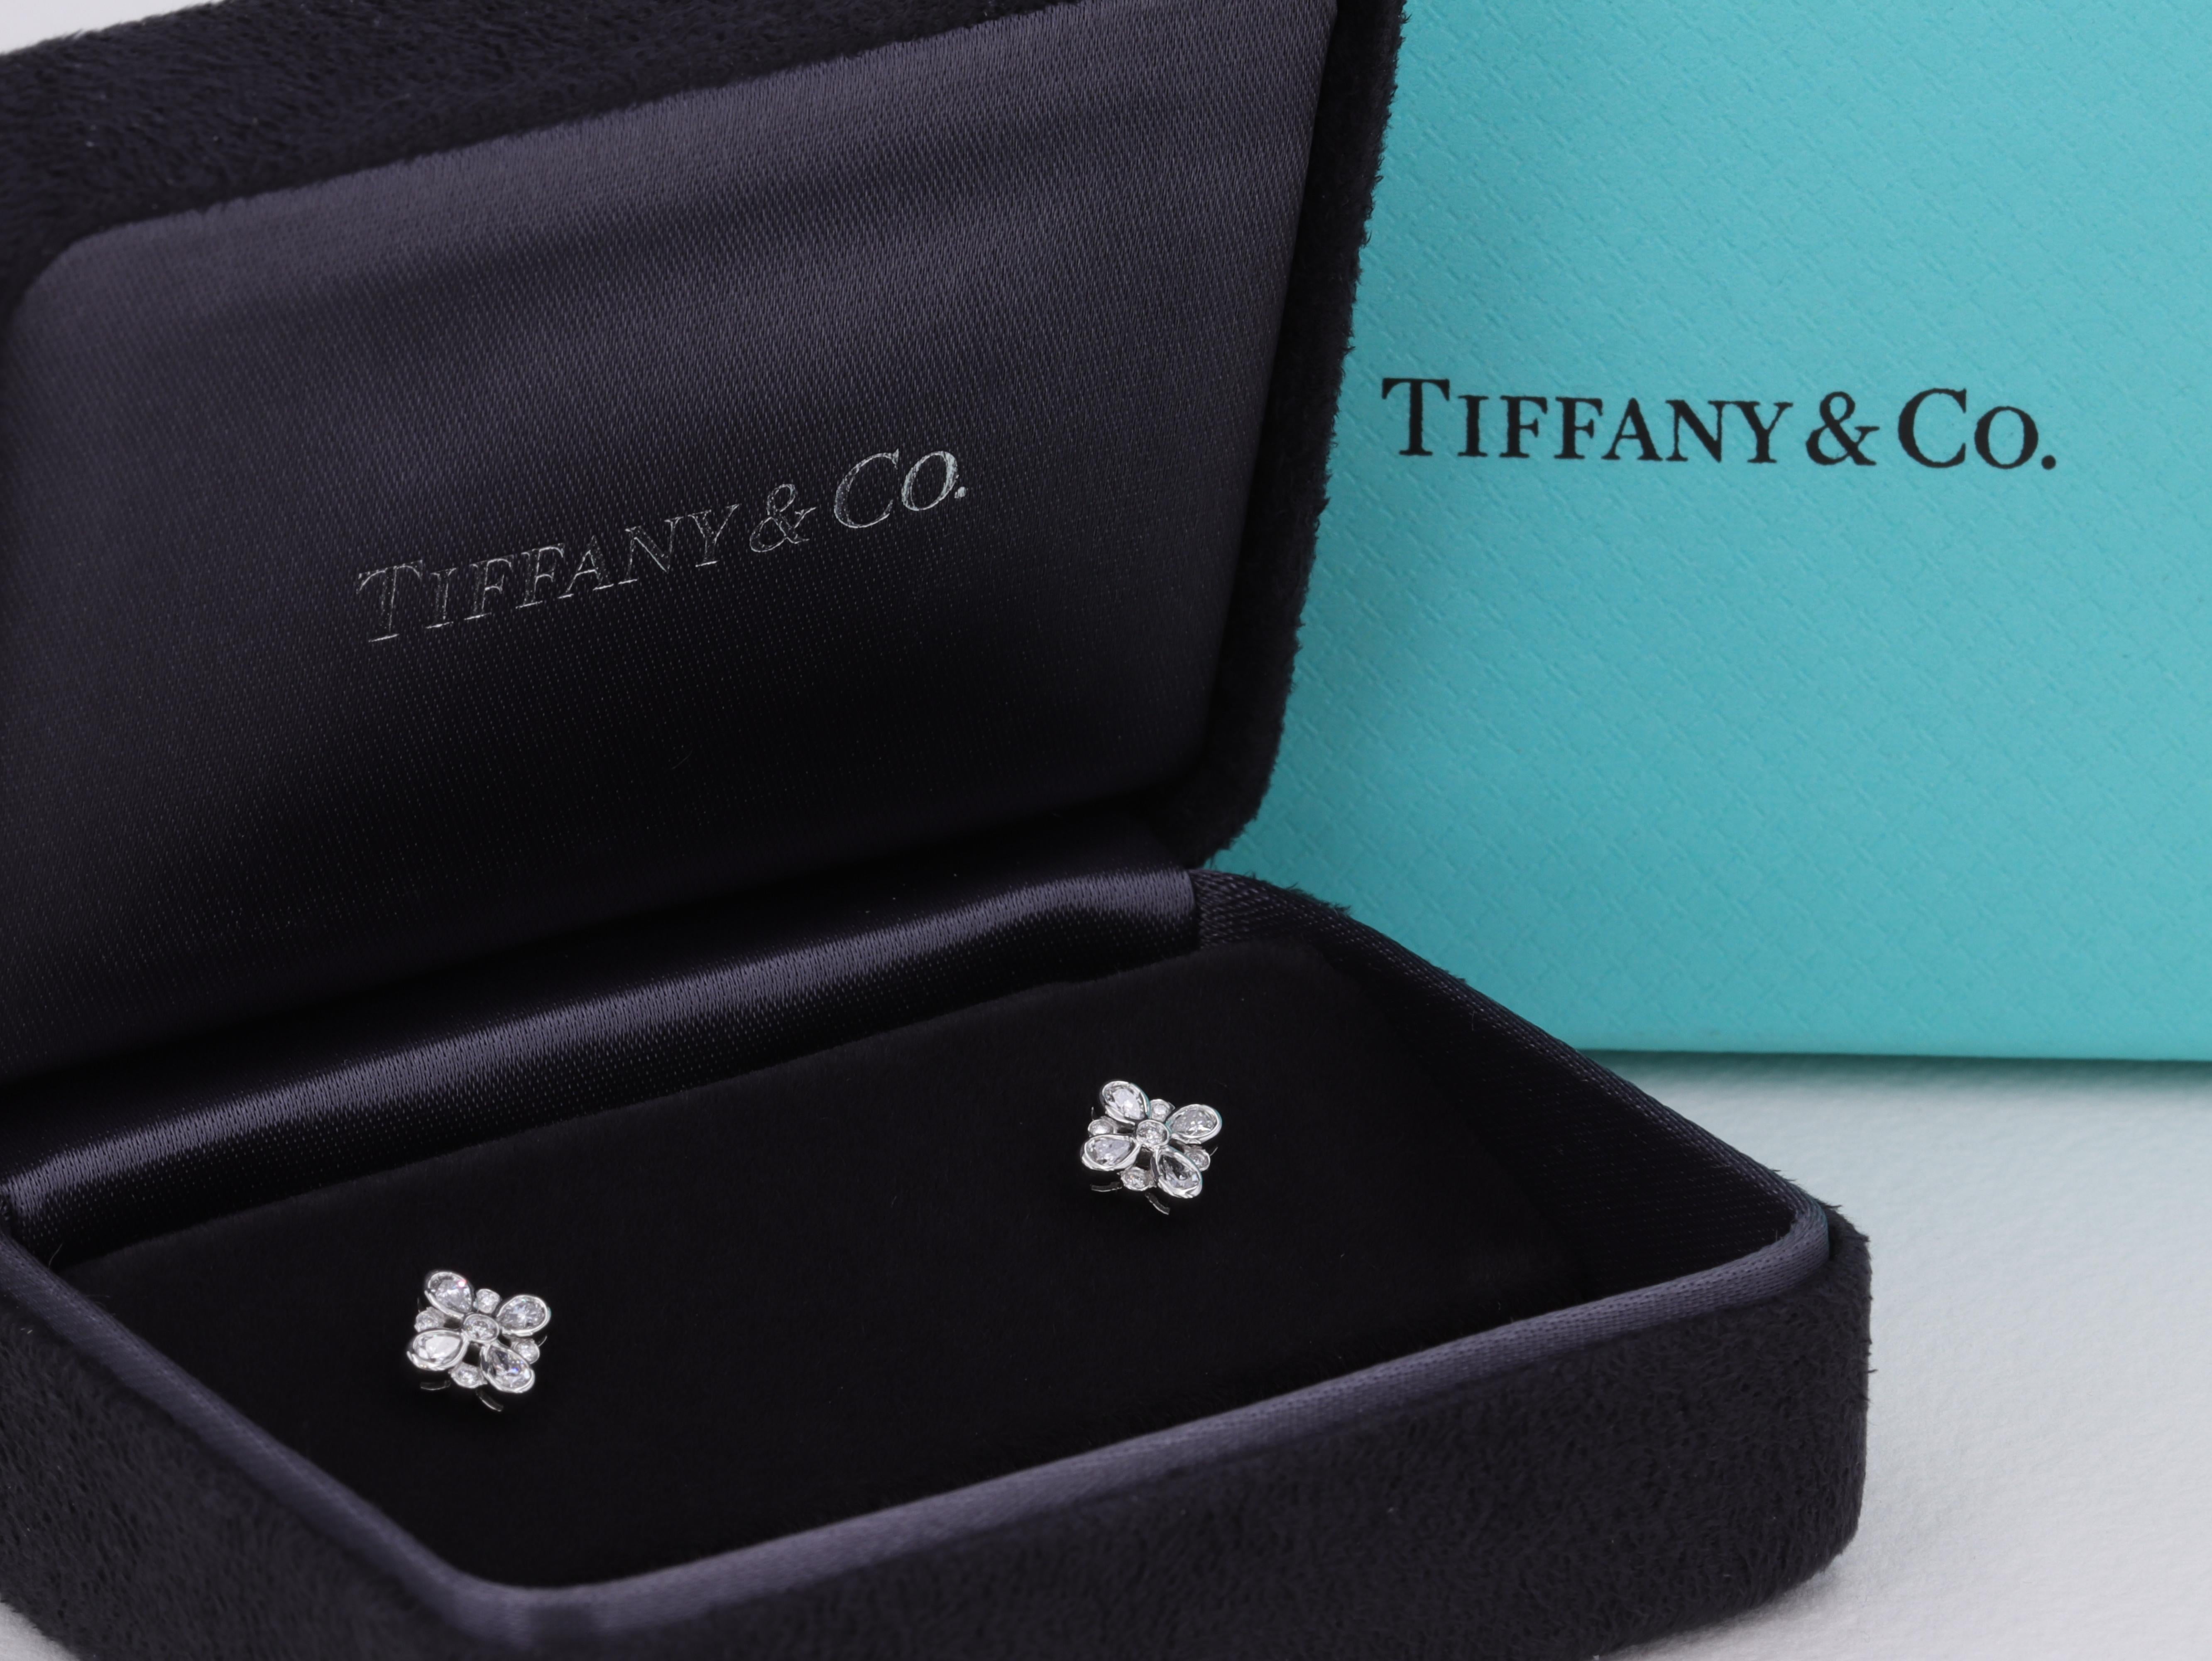 Tiffany & Co. Enchant collection diamond and platinum floral motif earrings featuring . 35 carats of pear shape and round brilliant cut diamonds of E-G color and VS+ clarity.

The earrings feature 